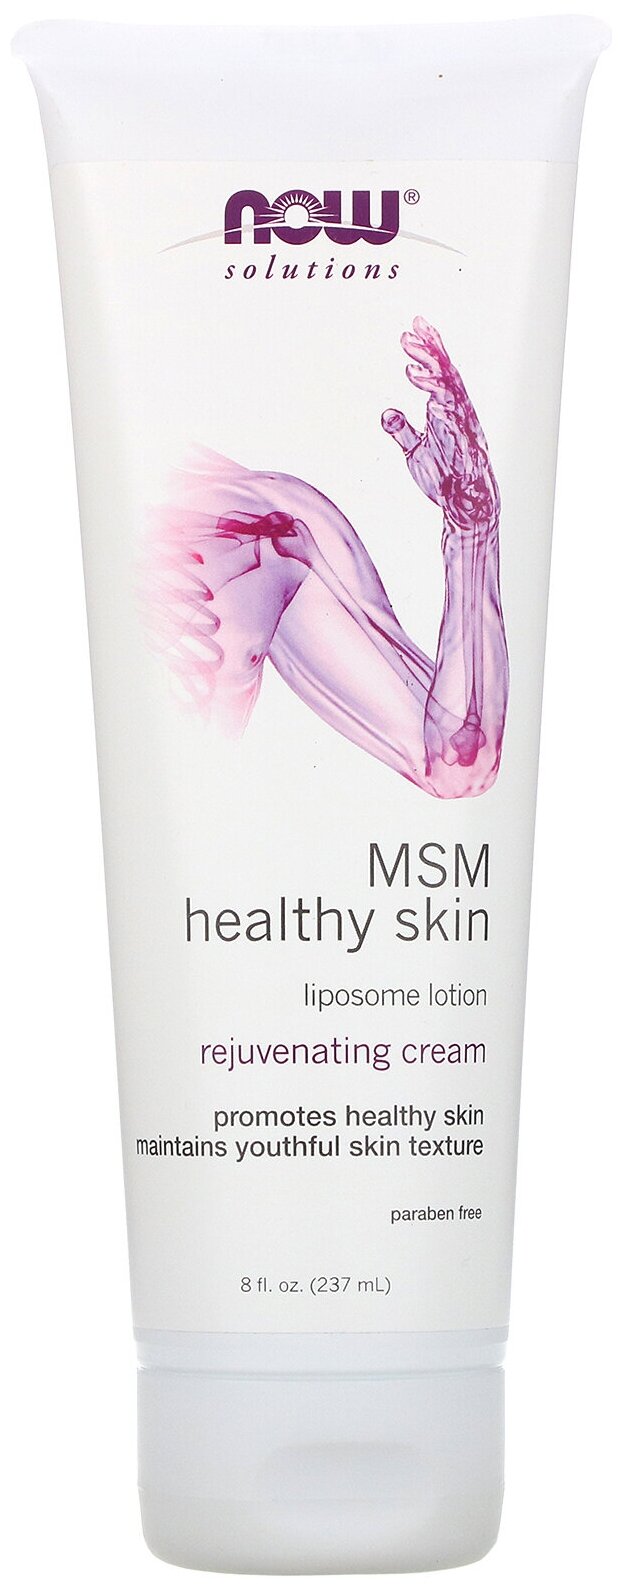 Now Msm Healthy Skin Liposome Lotion 237 мл